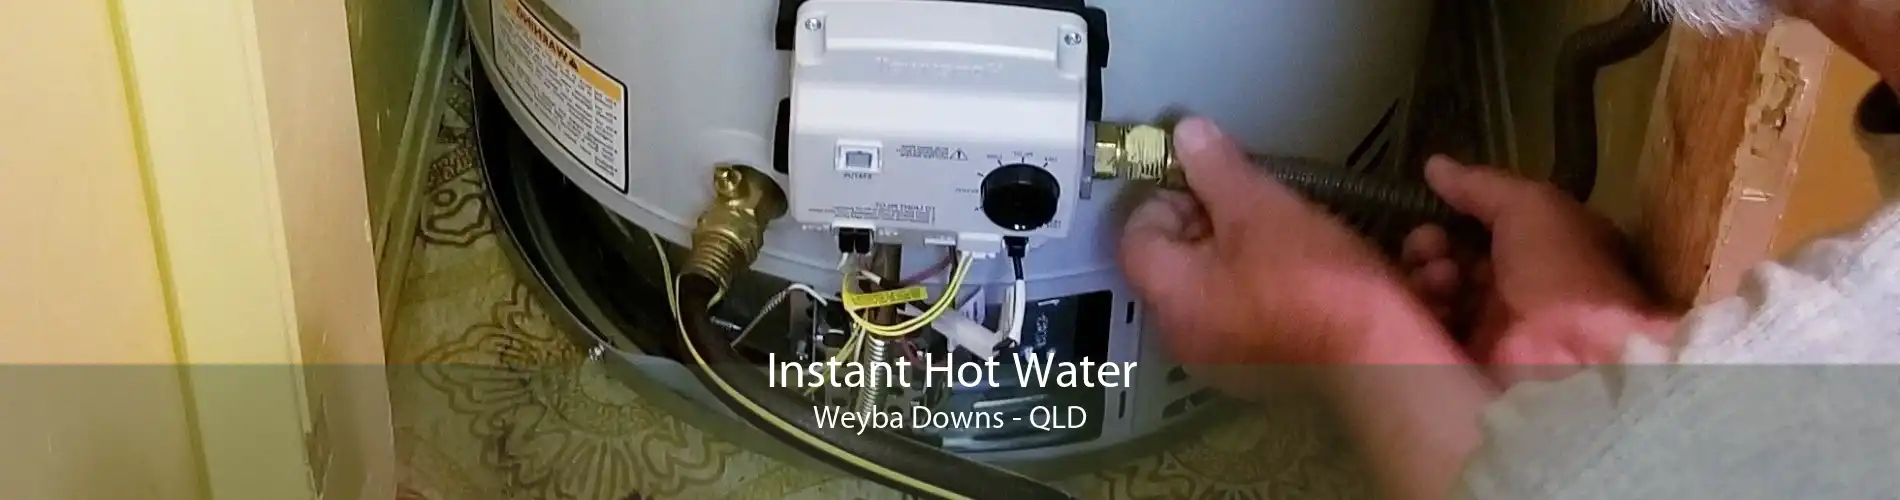 Instant Hot Water Weyba Downs - QLD